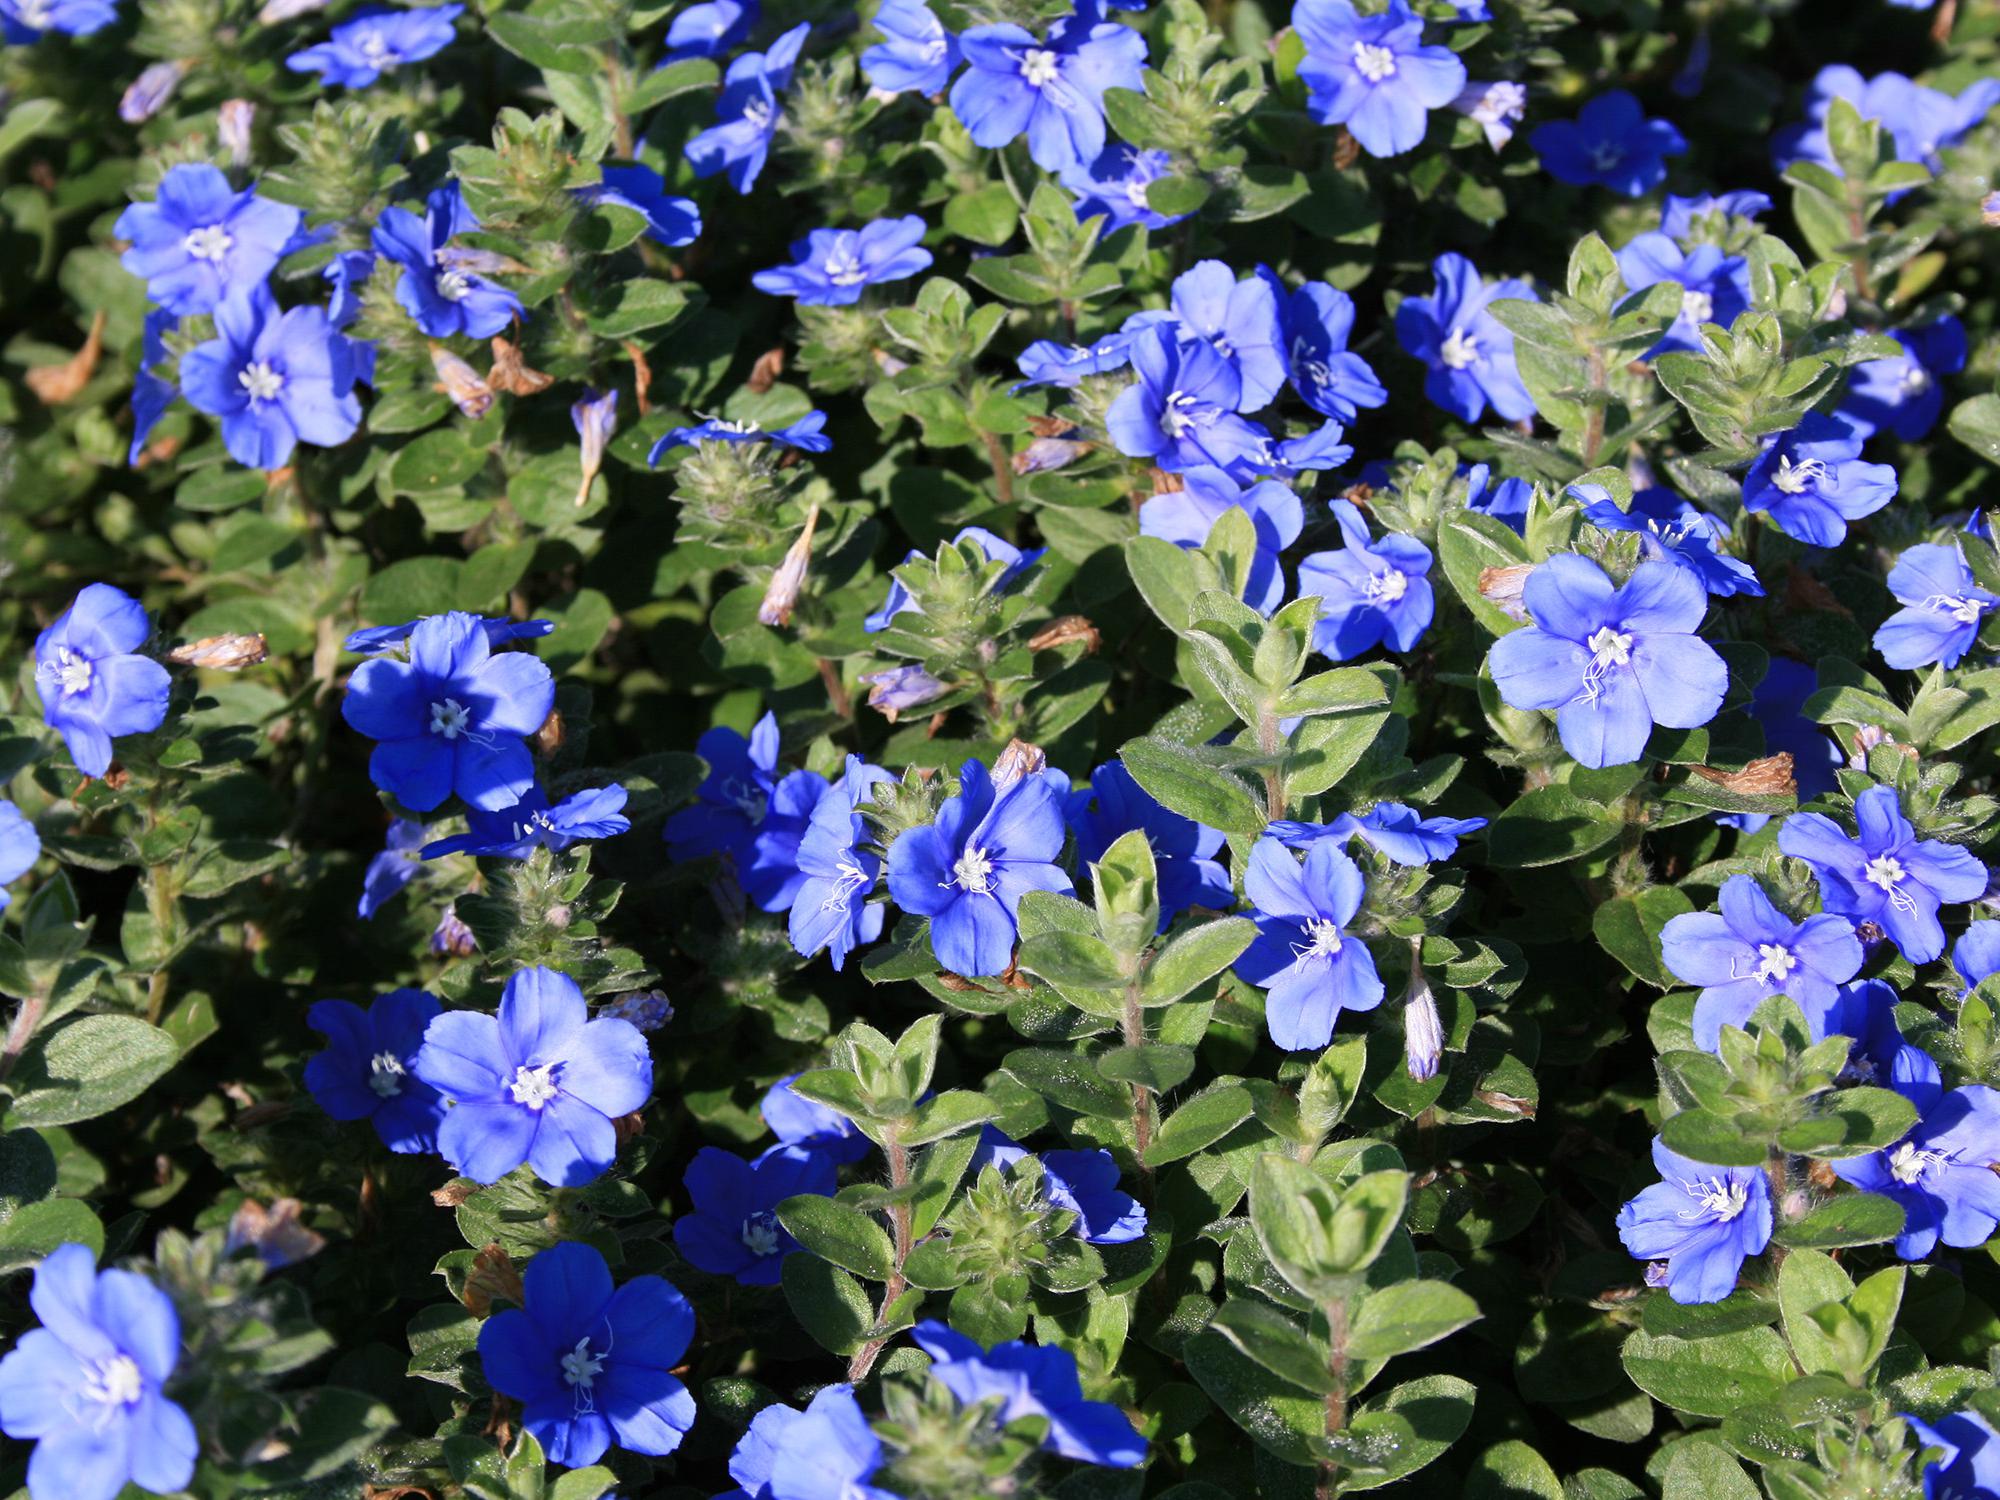 Dozens of blue flowers bloom above an uninterrupted sea of green leaves